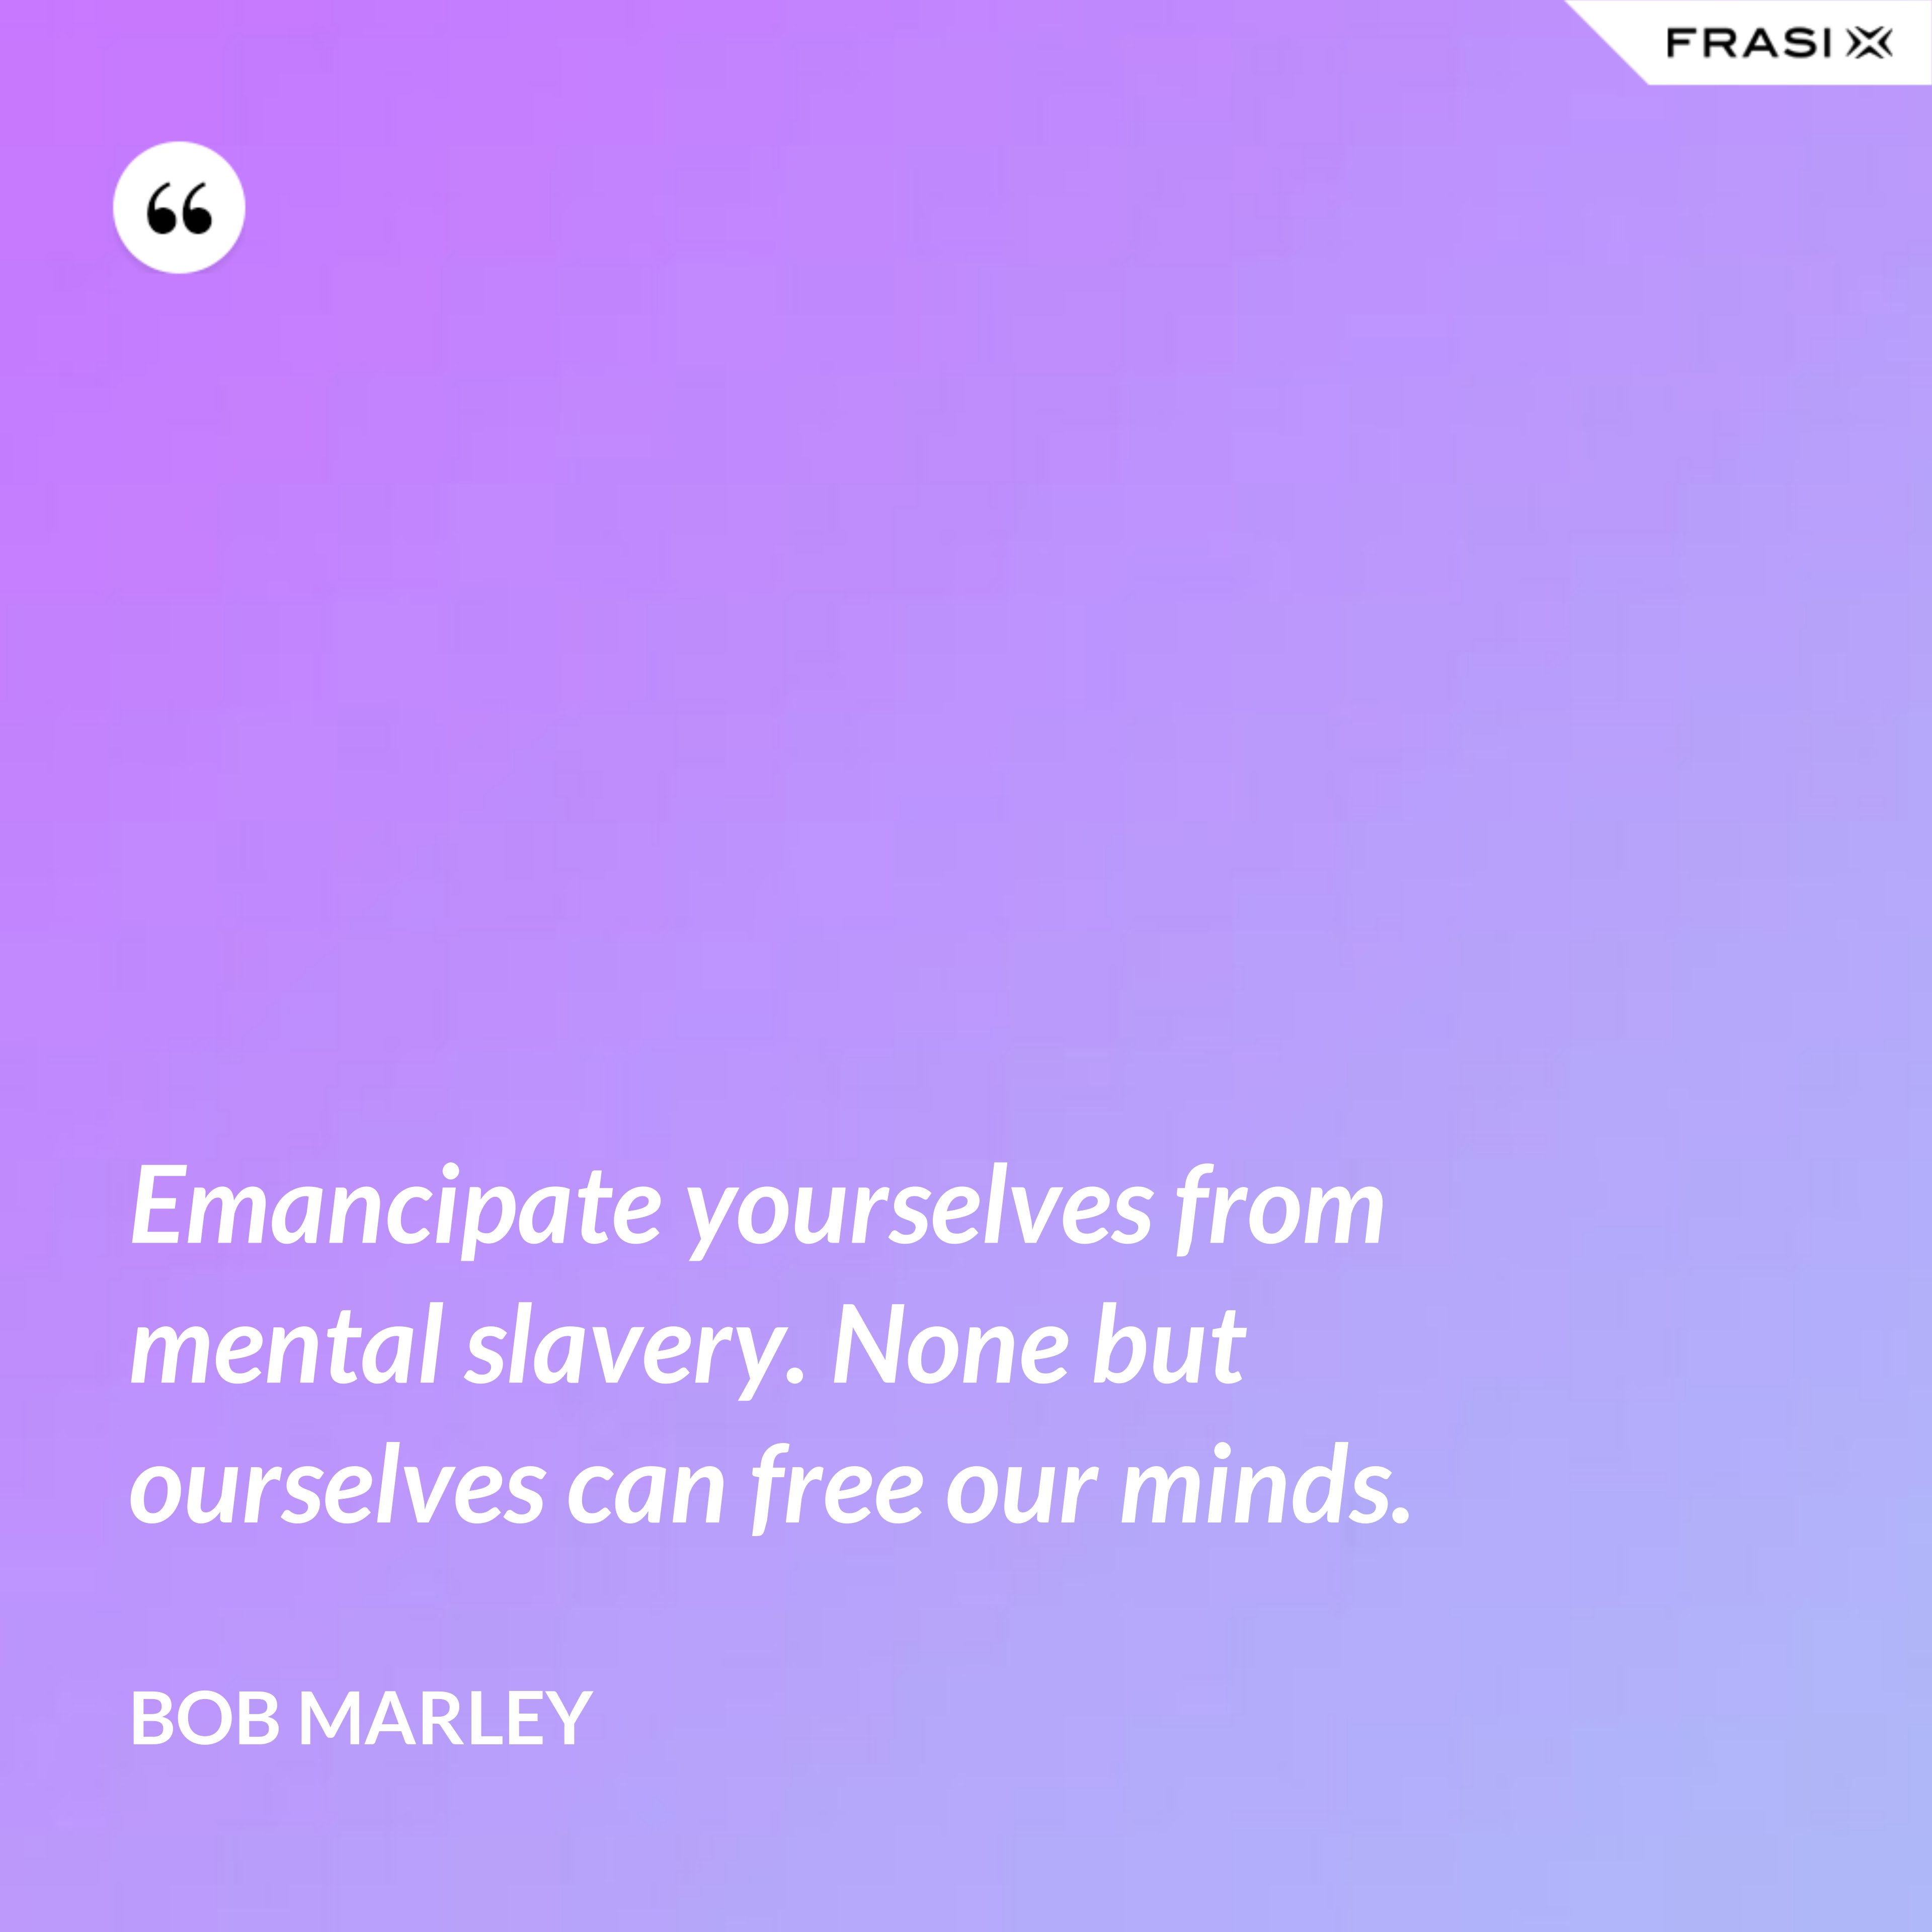 Emancipate yourselves from mental slavery. None but ourselves can free our minds. - Bob Marley